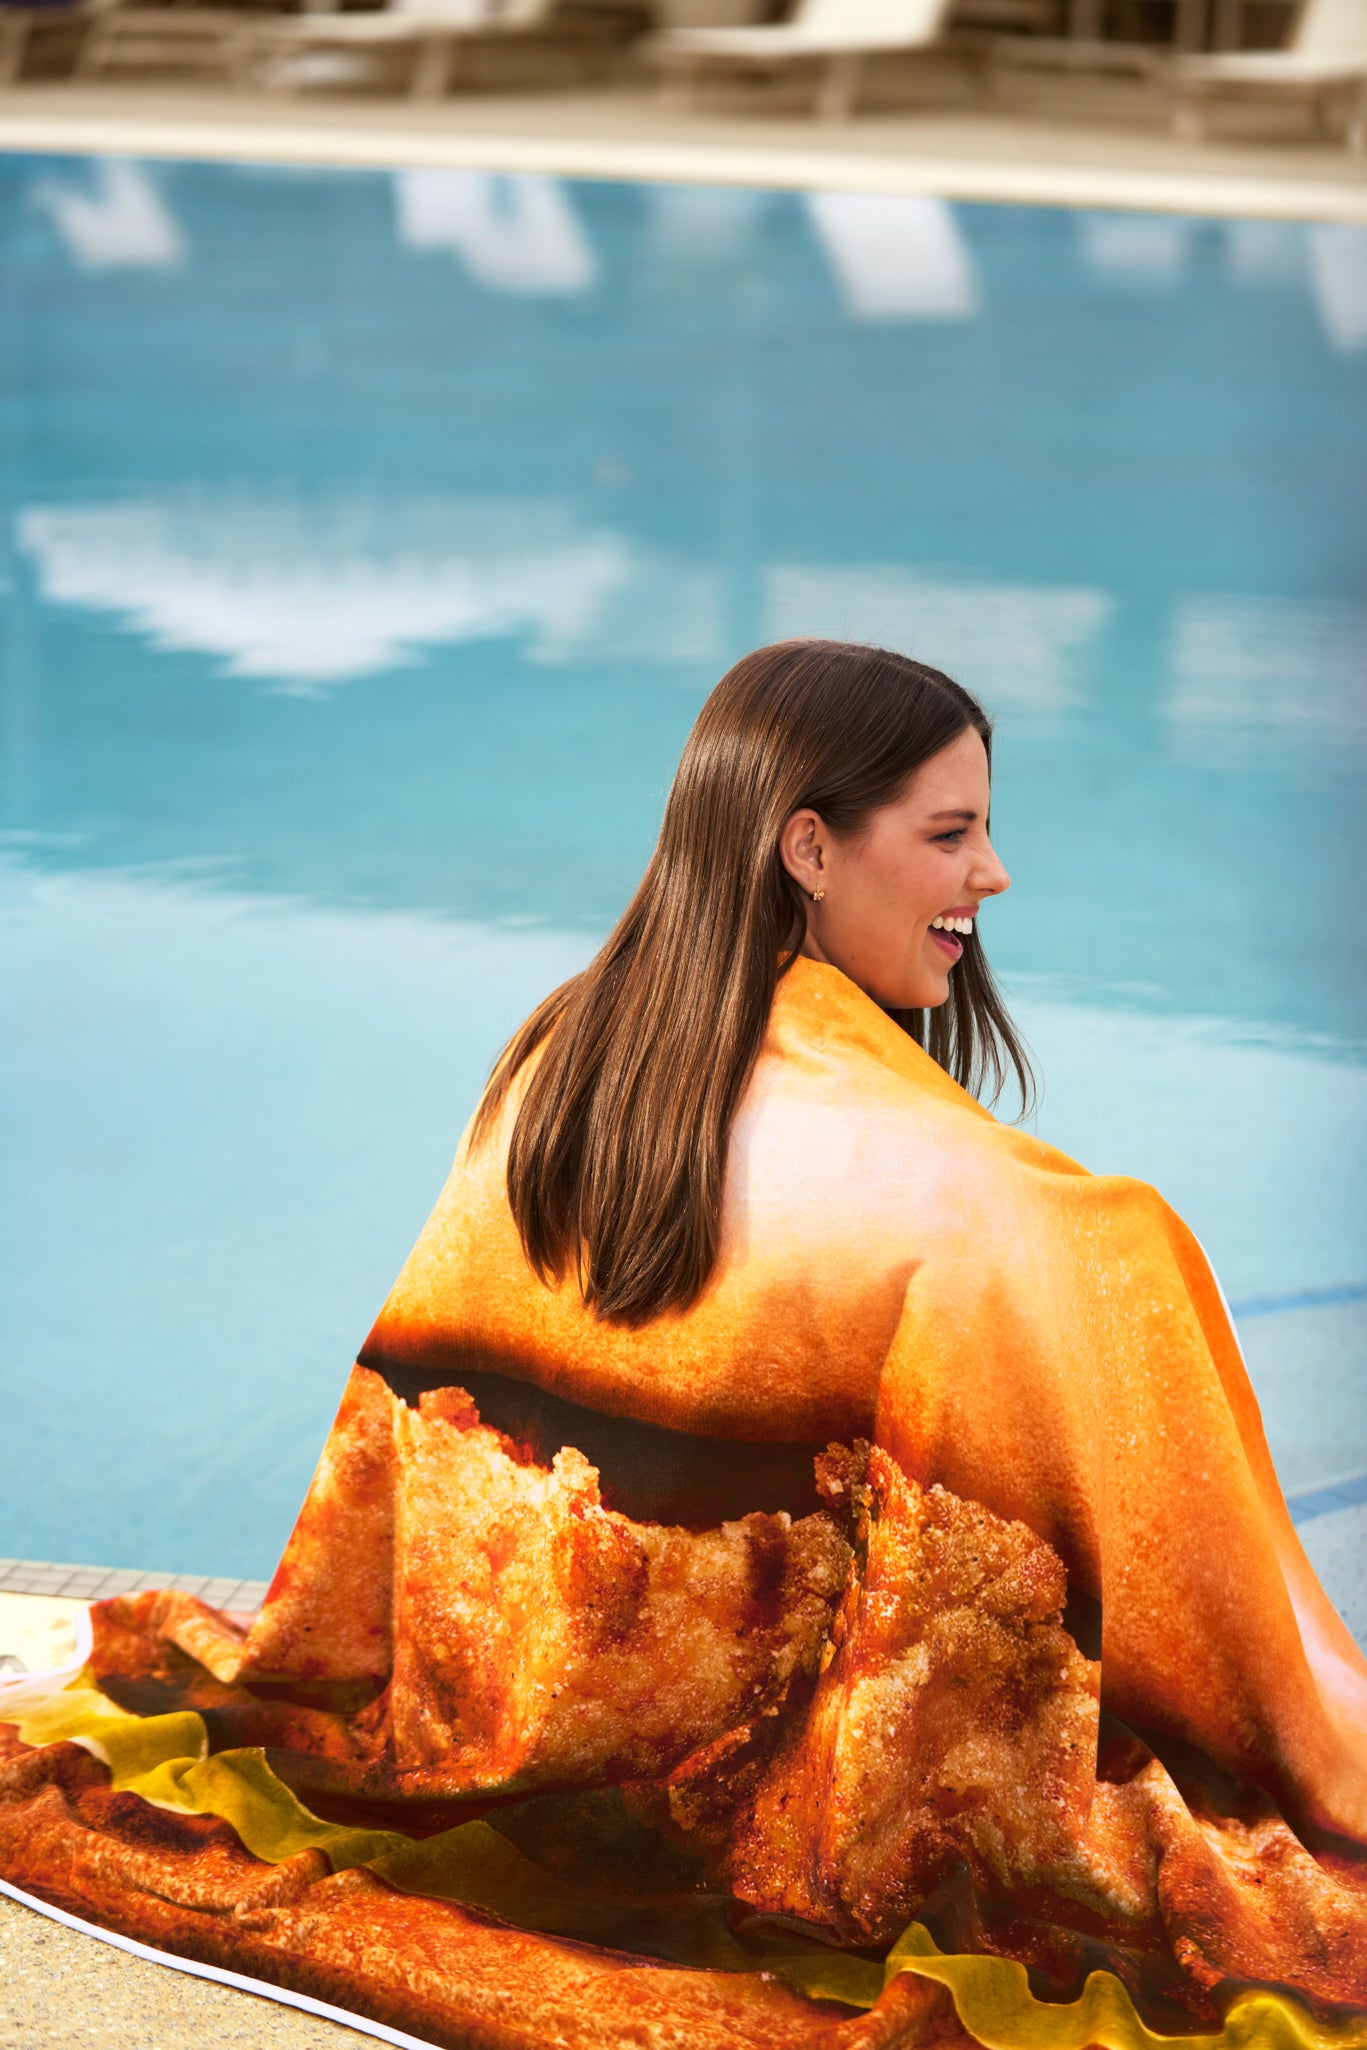 Woman sitting by a pool with the Original Chick-fil-A® Chicken Sandwich Towel draped over her shoulders